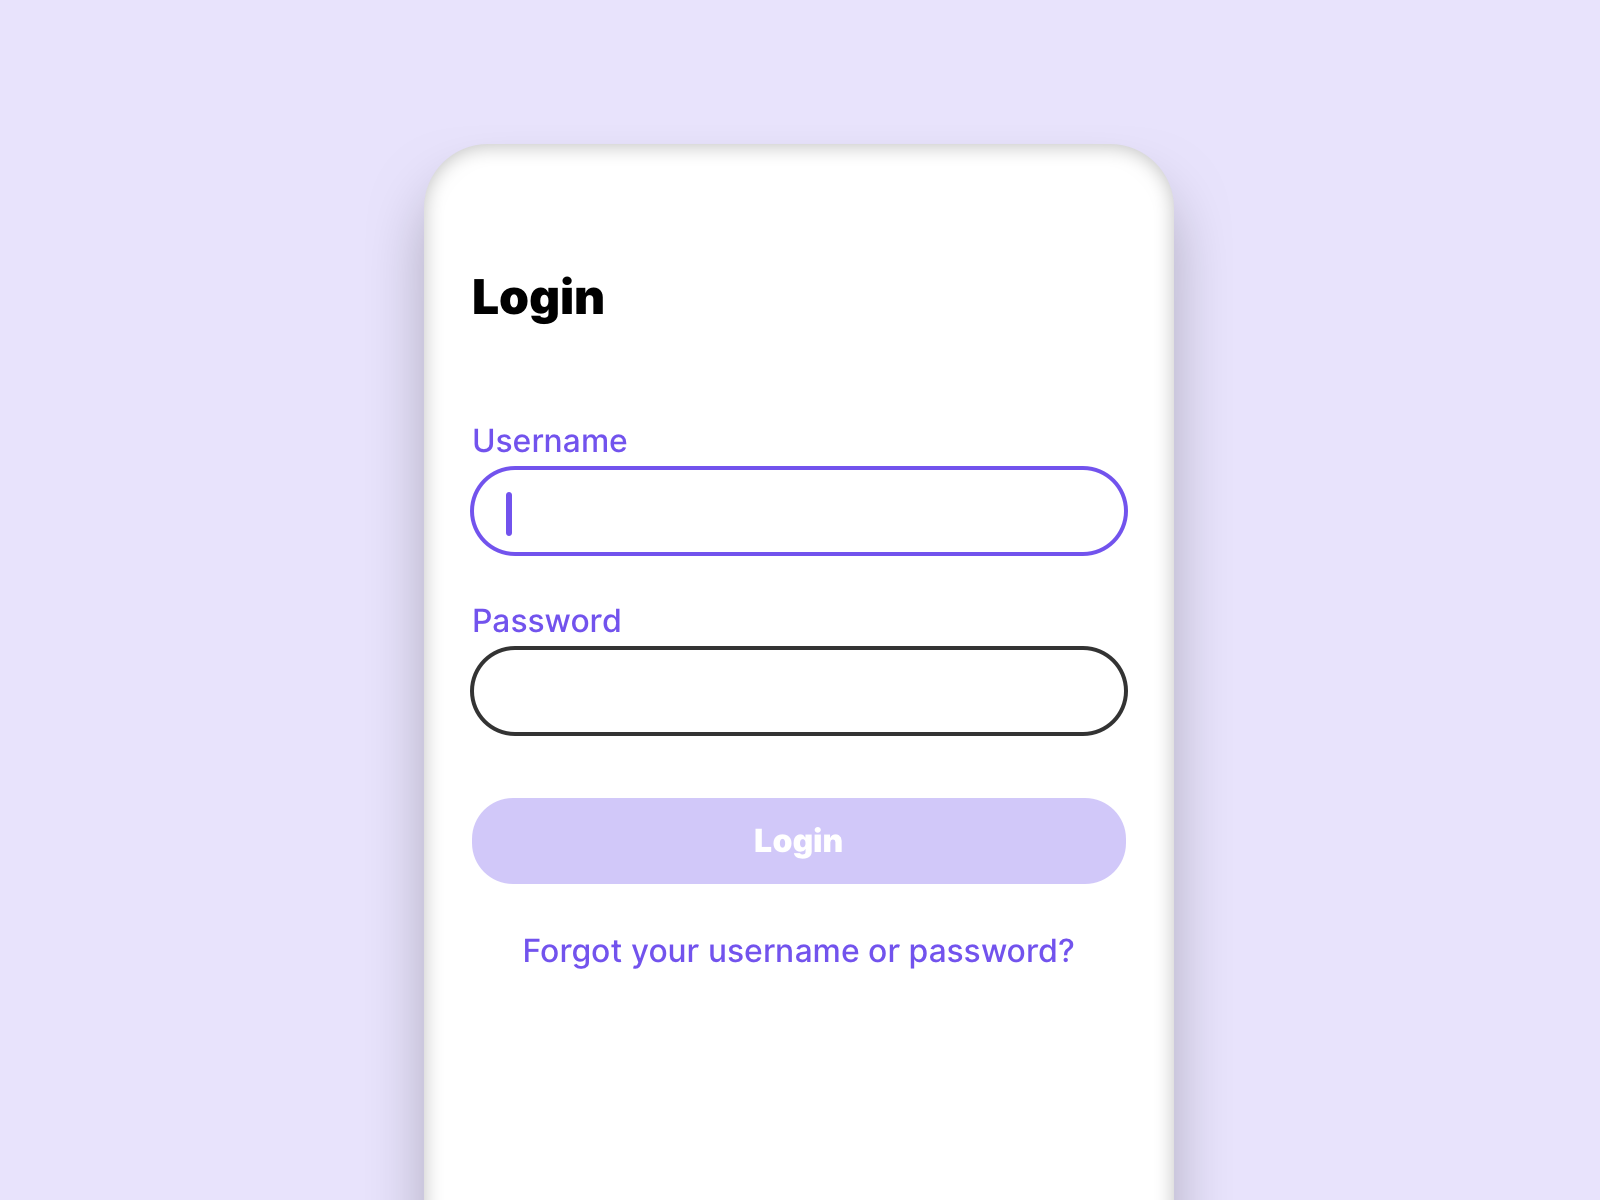 In this picture we see empty input fields, so the login button is still inactive. 